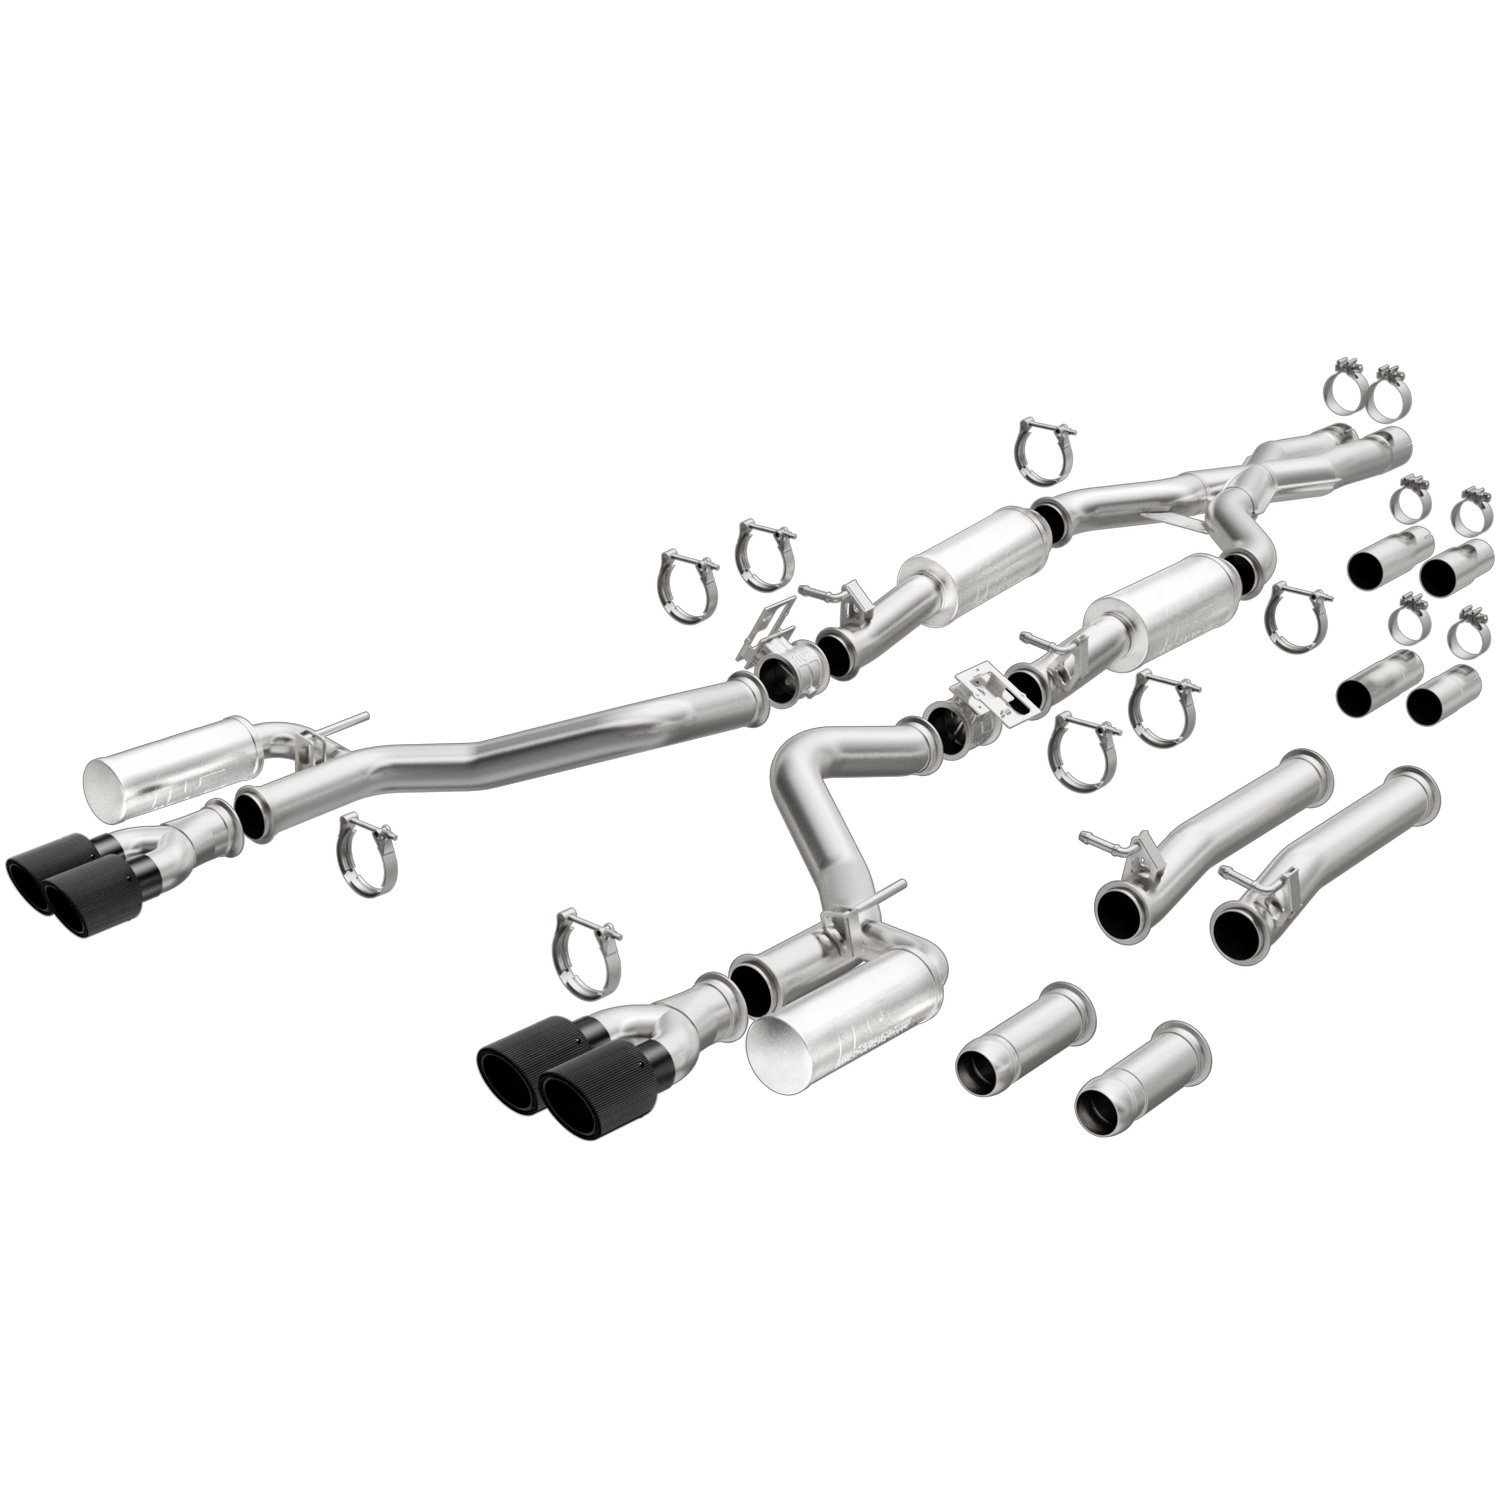 xMOD Series Cat-Back Exhaust System Fits Late-Model Dodge